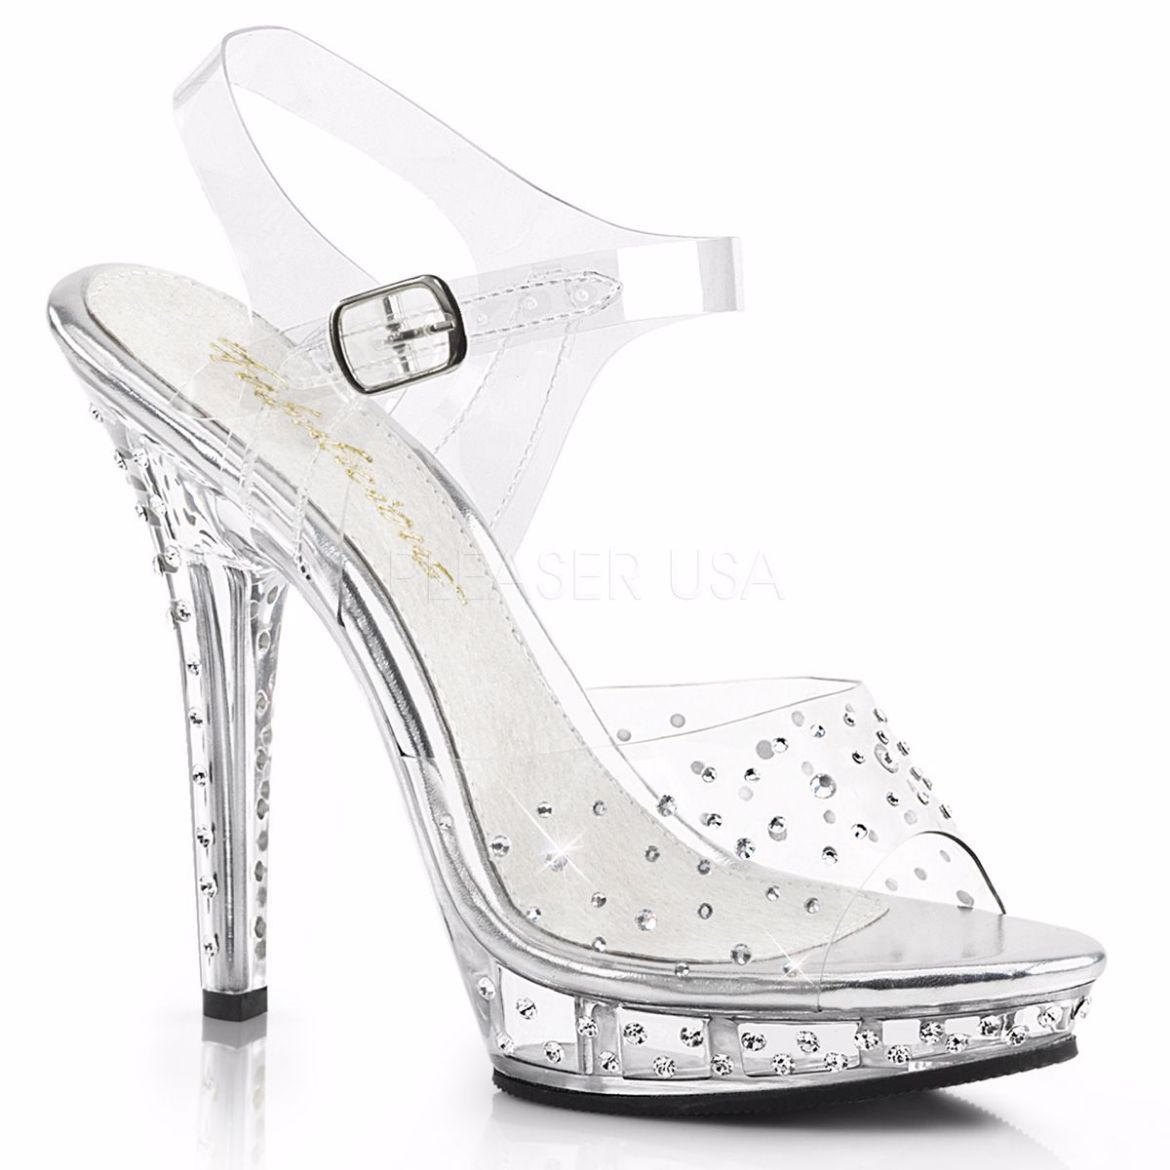 Product image of Fabulicious Lip-108Rs Clear/Clear, 5 inch (12.7 cm) Heel, 3/4 inch (1.9 cm) Platform Sandal Shoes